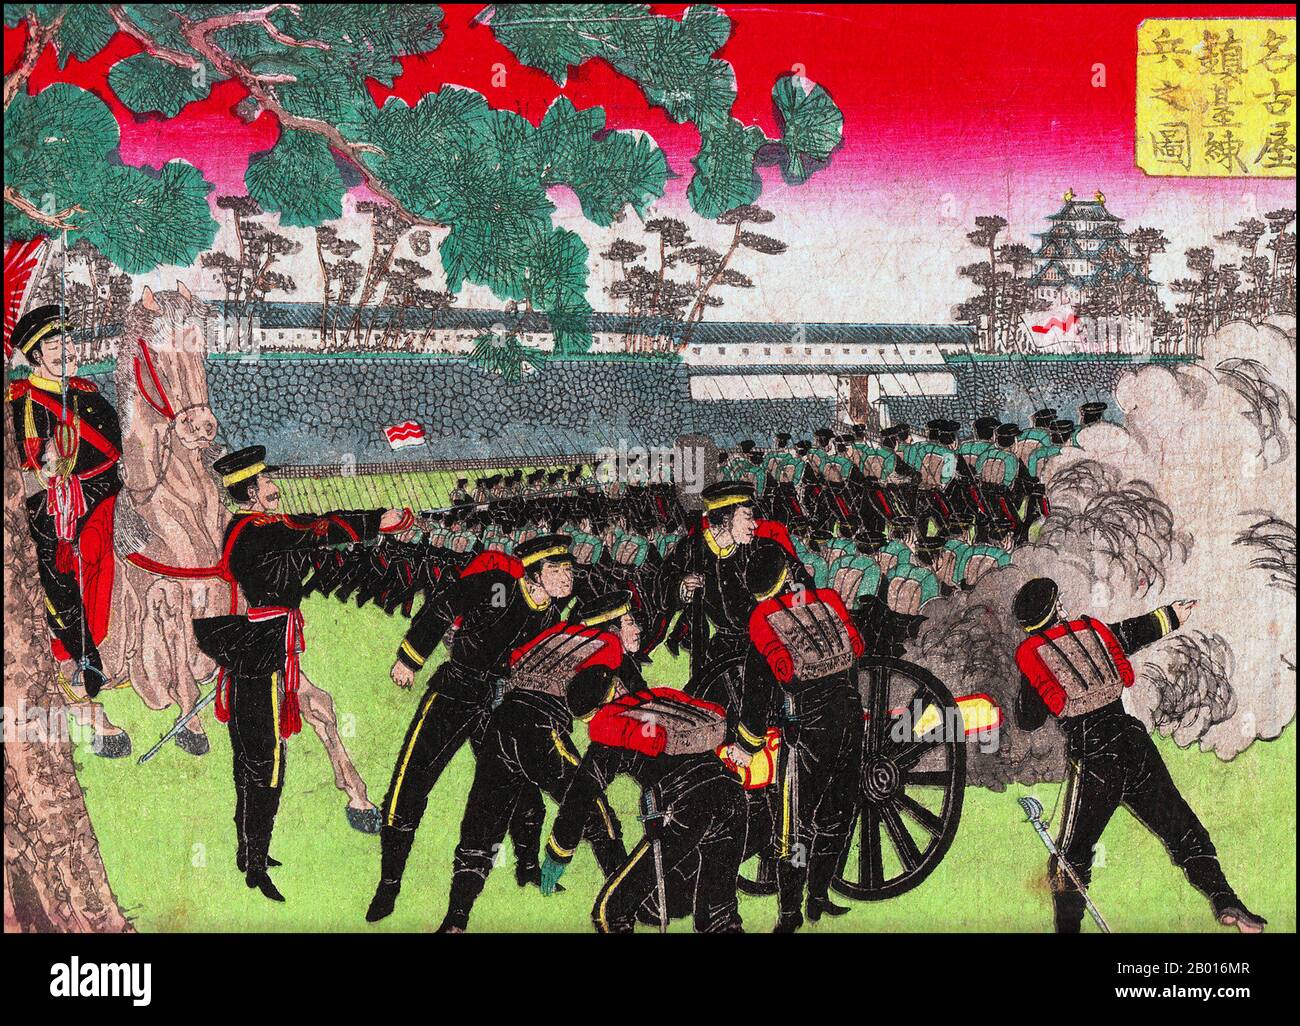 Japan: 'Military Display in Nagoya'. Ukiyo-e woodblock print by Hirokuni (fl. 19th century), 1888.  Nagoya is the third-largest city and the fourth most populous urban area in Japan. Located on the Pacific coast in the Chūbu region of central Honshū, it is the capital of Aichi Prefecture and is one of Japan's major ports along with those of Tokyo, Osaka, Kobe, Yokohama, Chiba, and Moji. It is also the center of Japan's third largest metropolitan region, known as the Chūkyō Metropolitan Area. As of 2000, Chūkyō Metropolitan Area had 8.74 million people, of which 2.17 million lived in Nagoya. Stock Photo